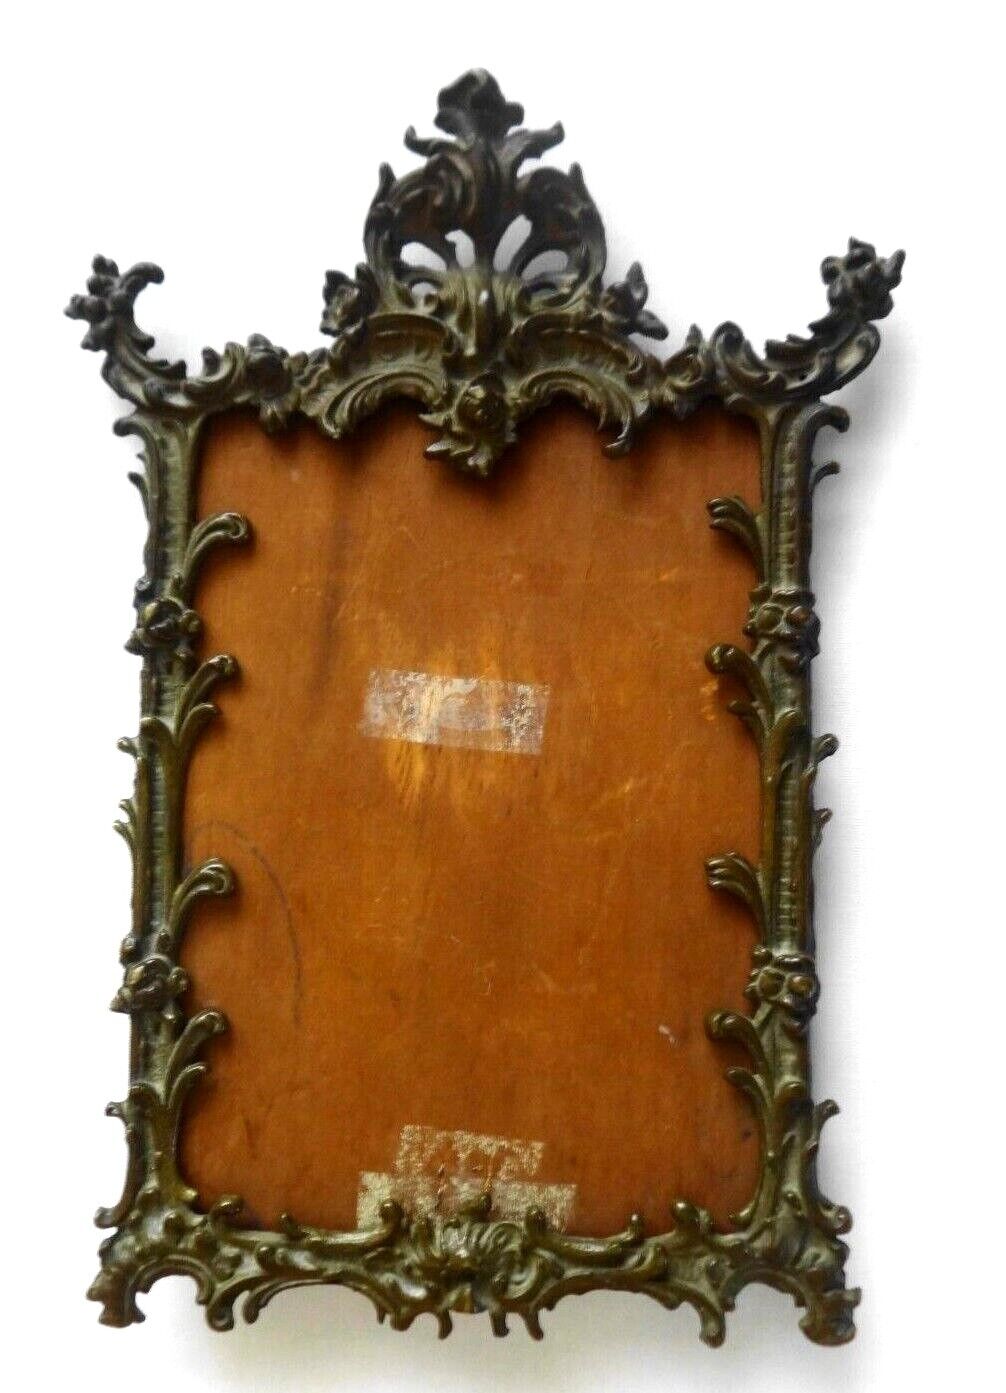 Rare Antique Ornate Metal French Victorian Picture Frame Handmade @1940